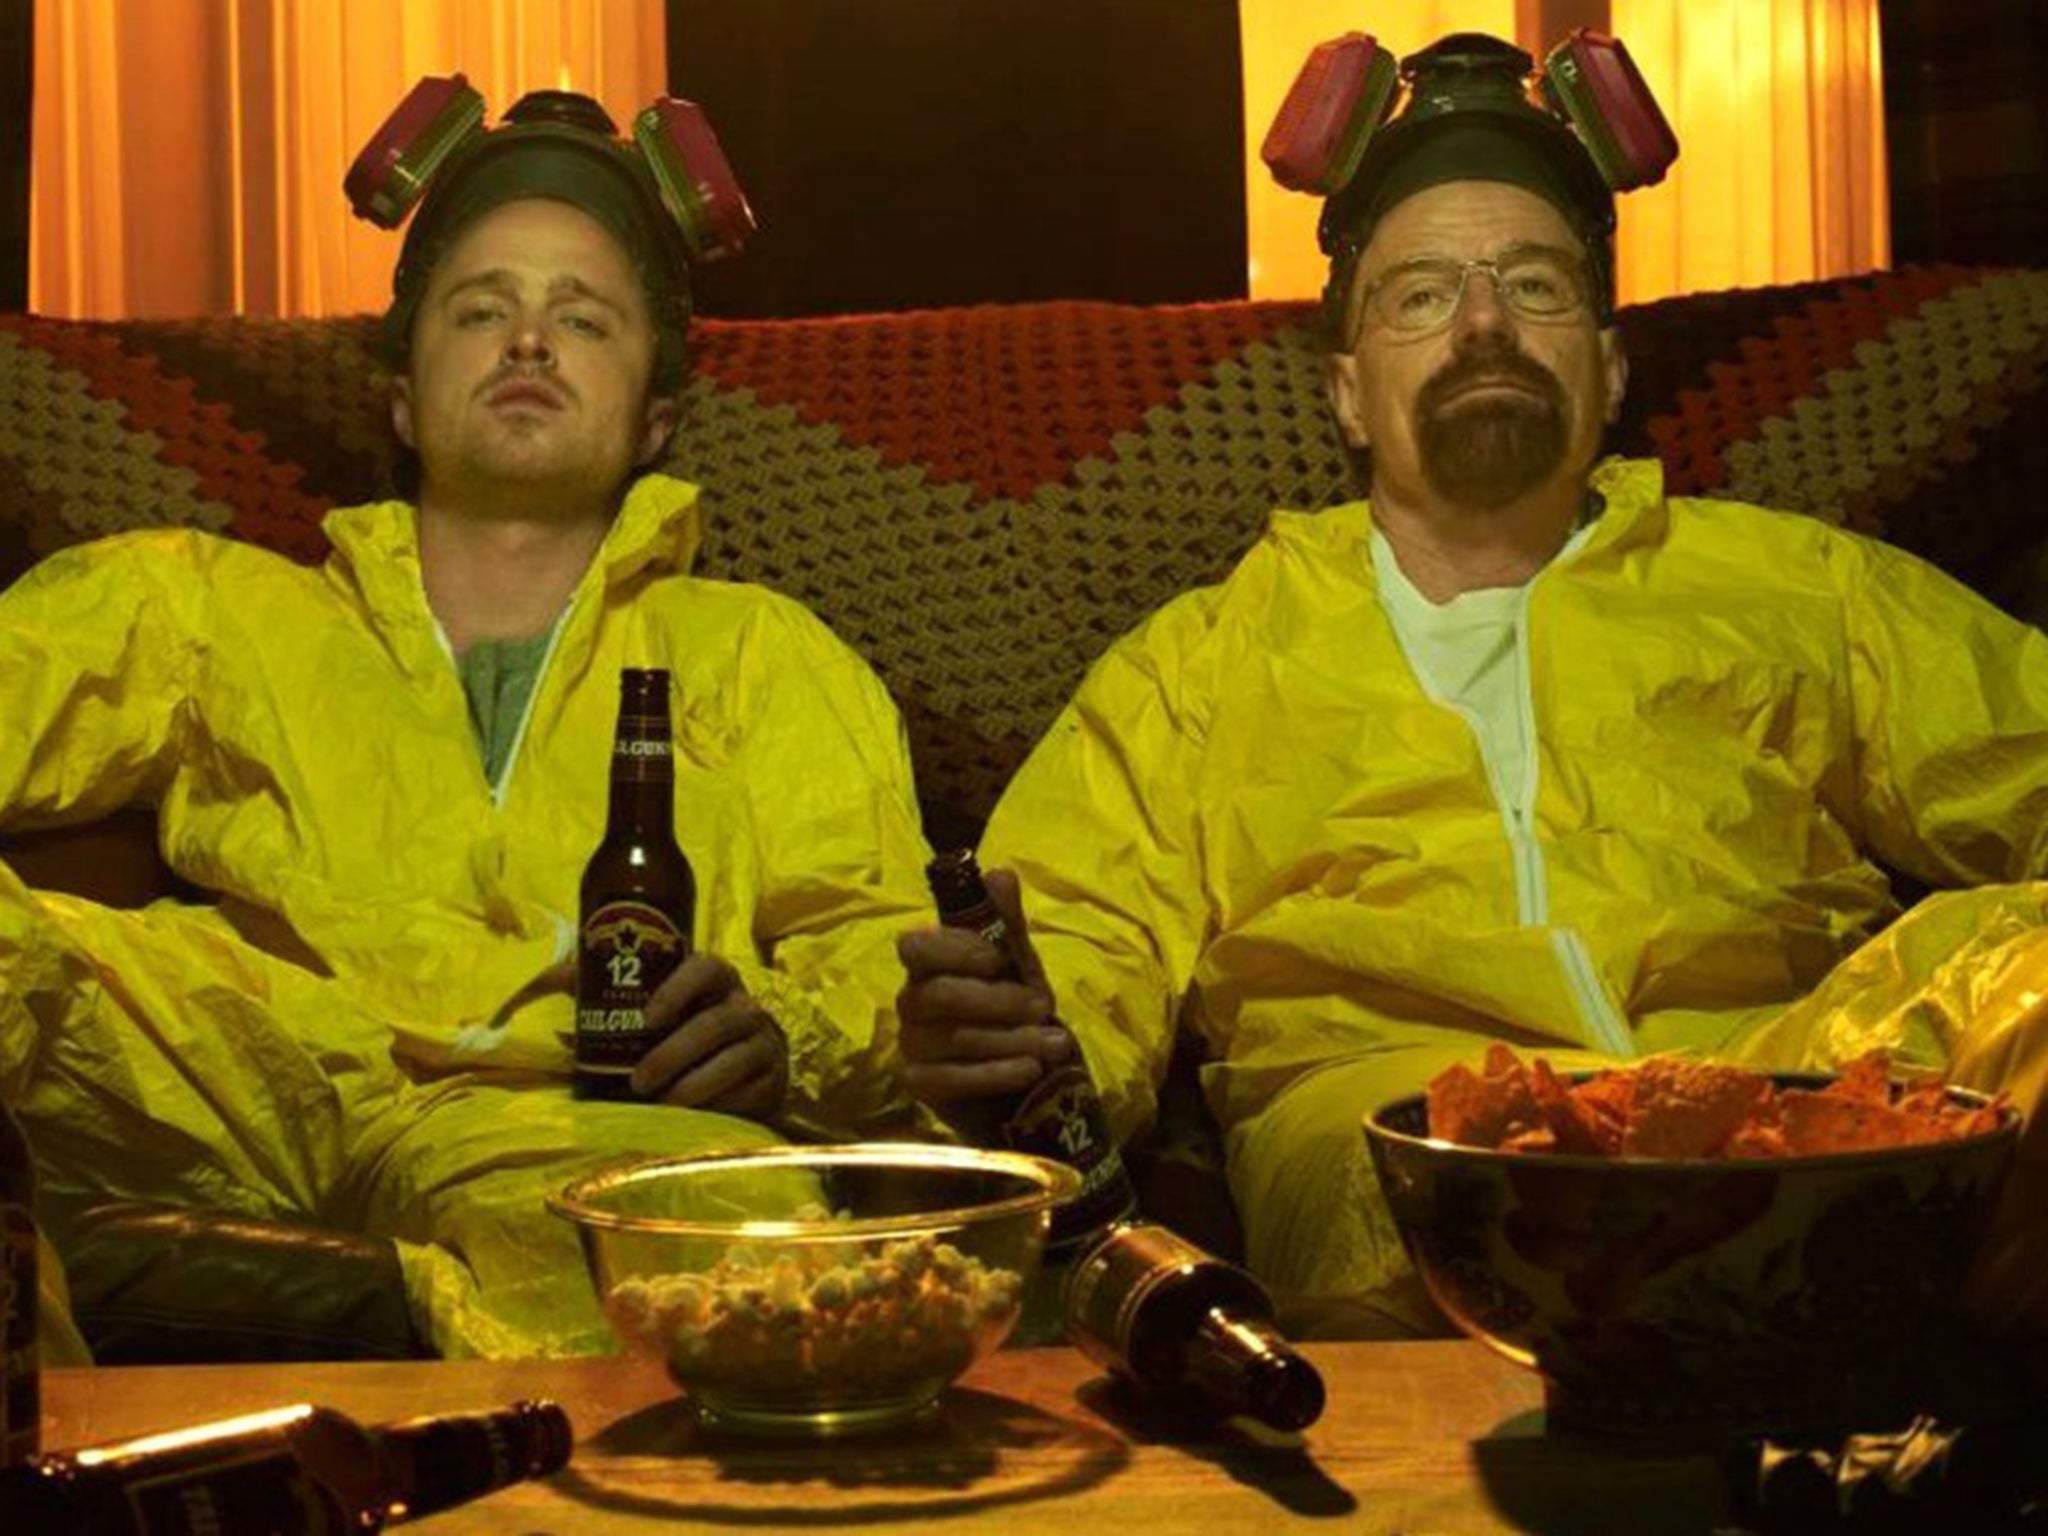 Breaking Bad was actually making crystal methamphetamine, according to The Daily Mash